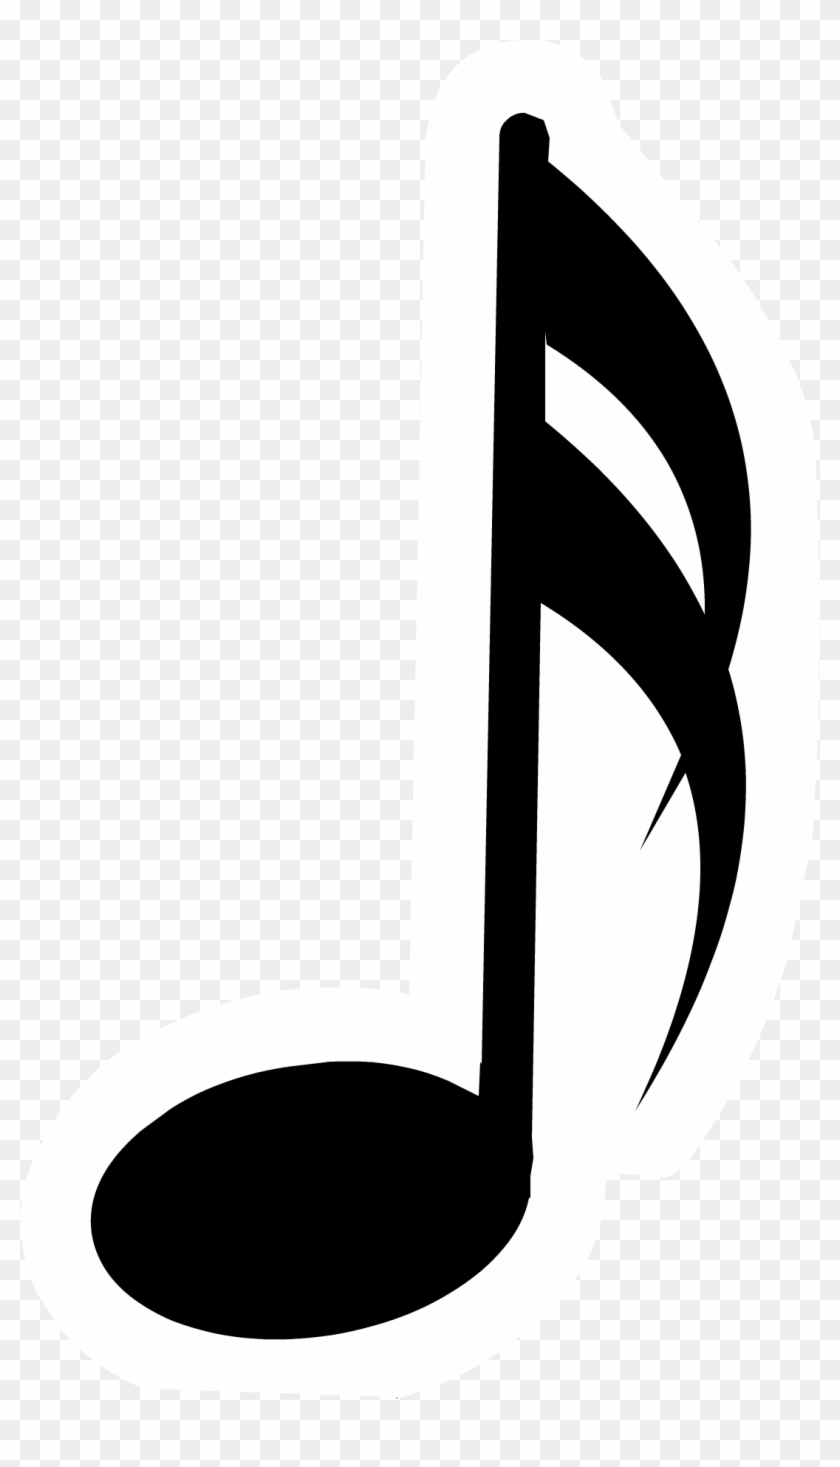 clipart music note single brinzle musical notes symbol